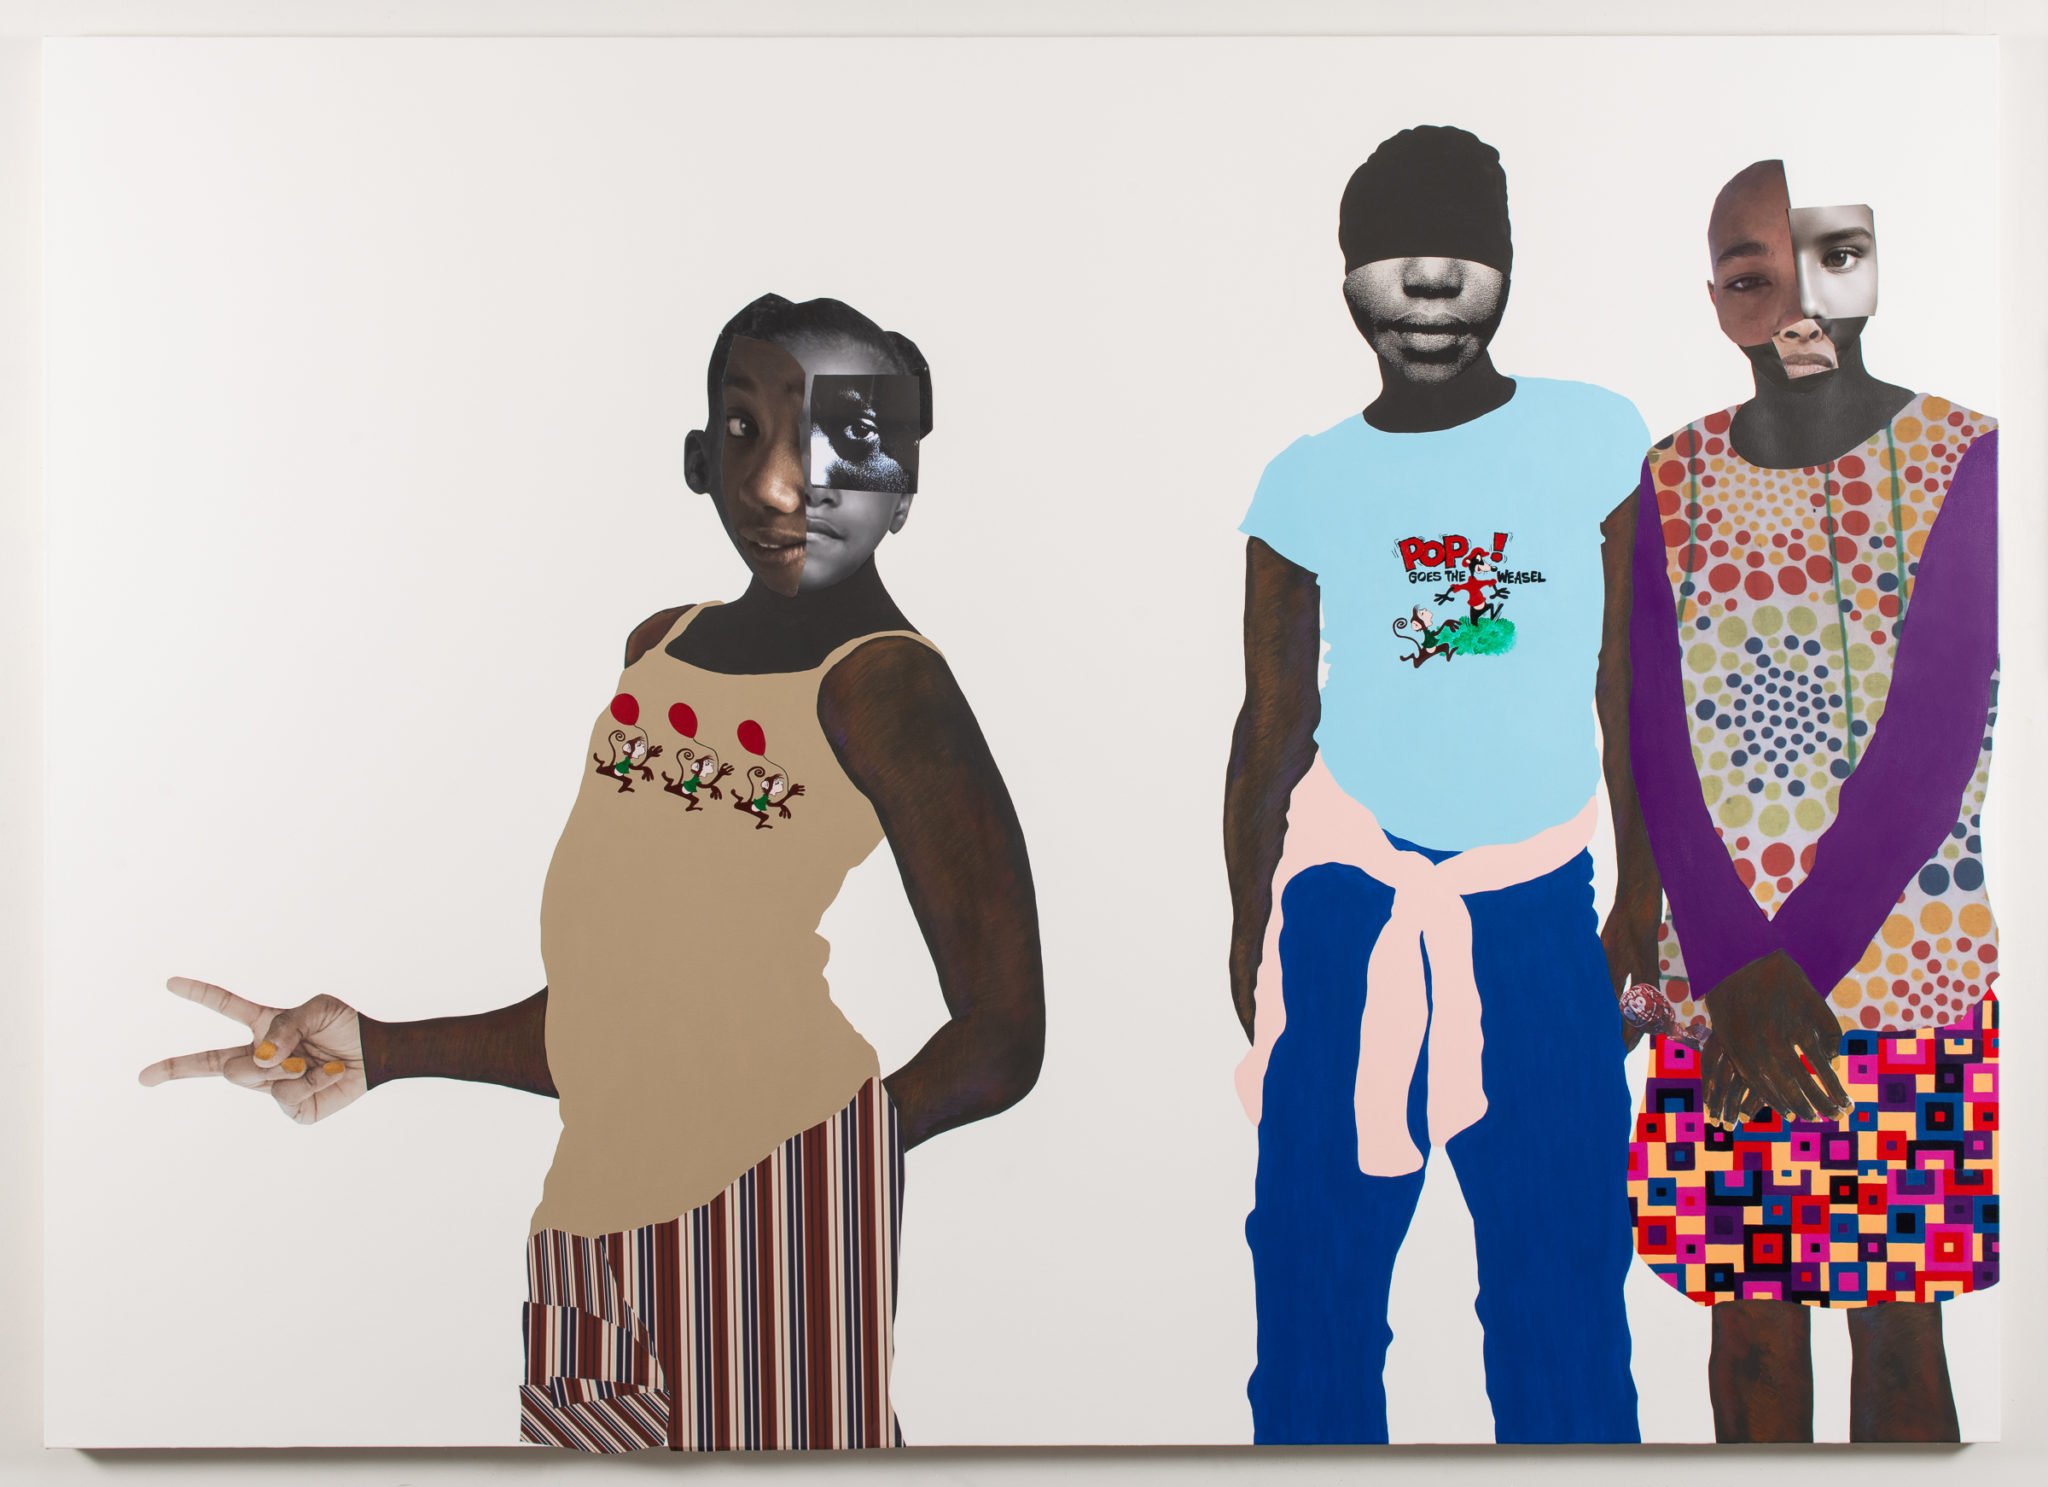 Deborah Roberts, The duty of disobedience, 2020. Mixed media collage on canvas. 72 x 100 inches